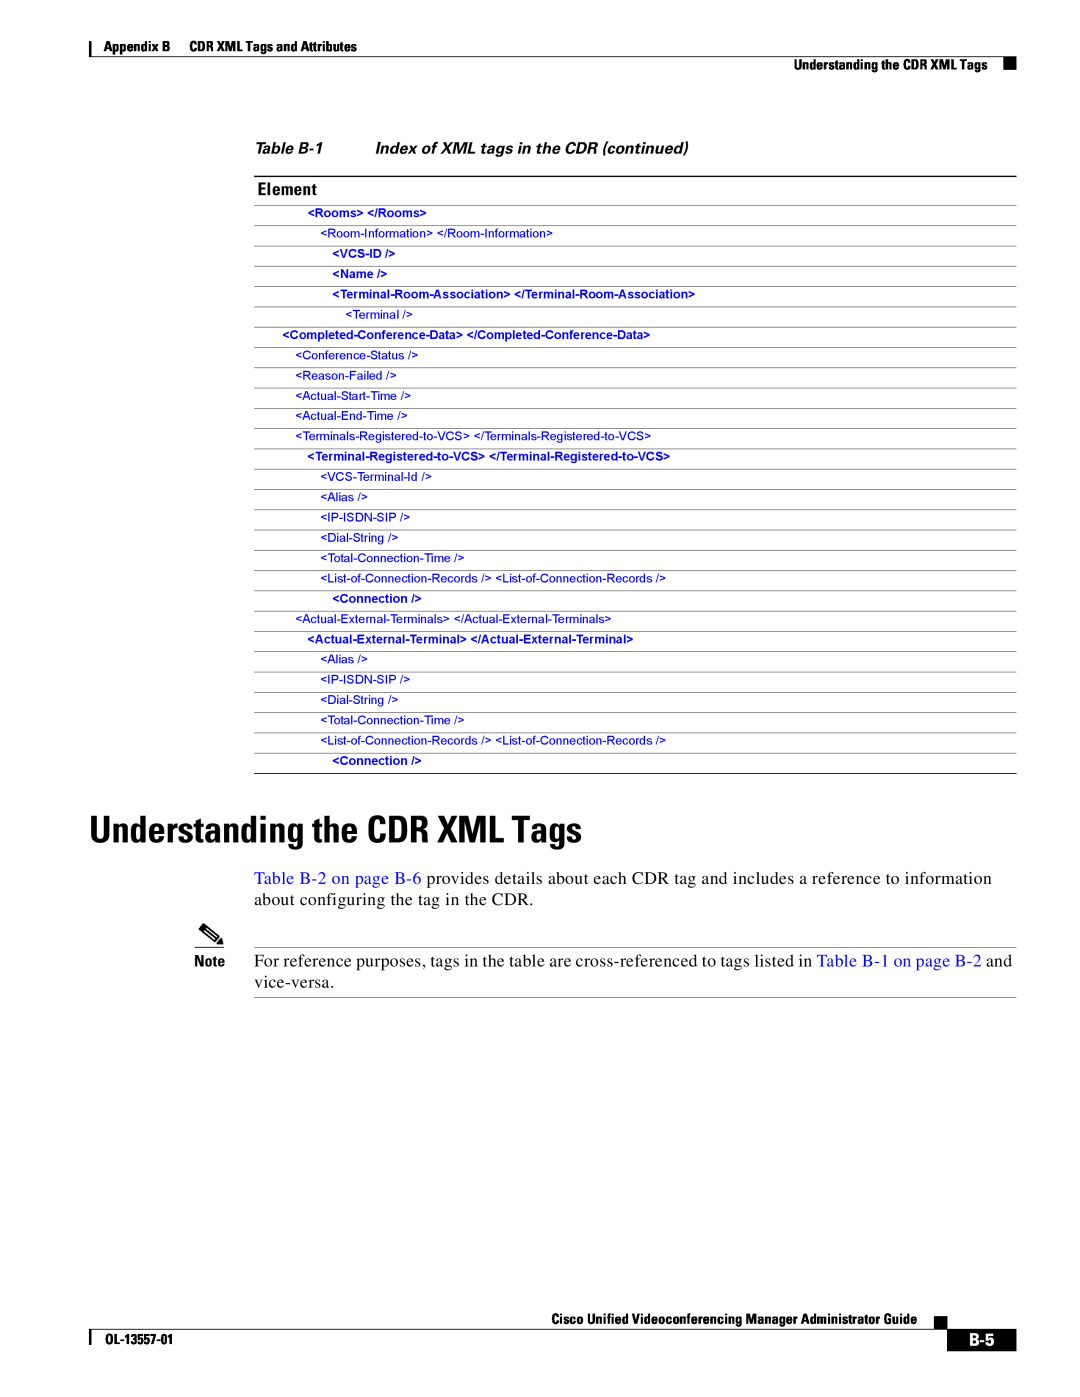 Cisco Systems appendix Understanding the CDR XML Tags, Element 